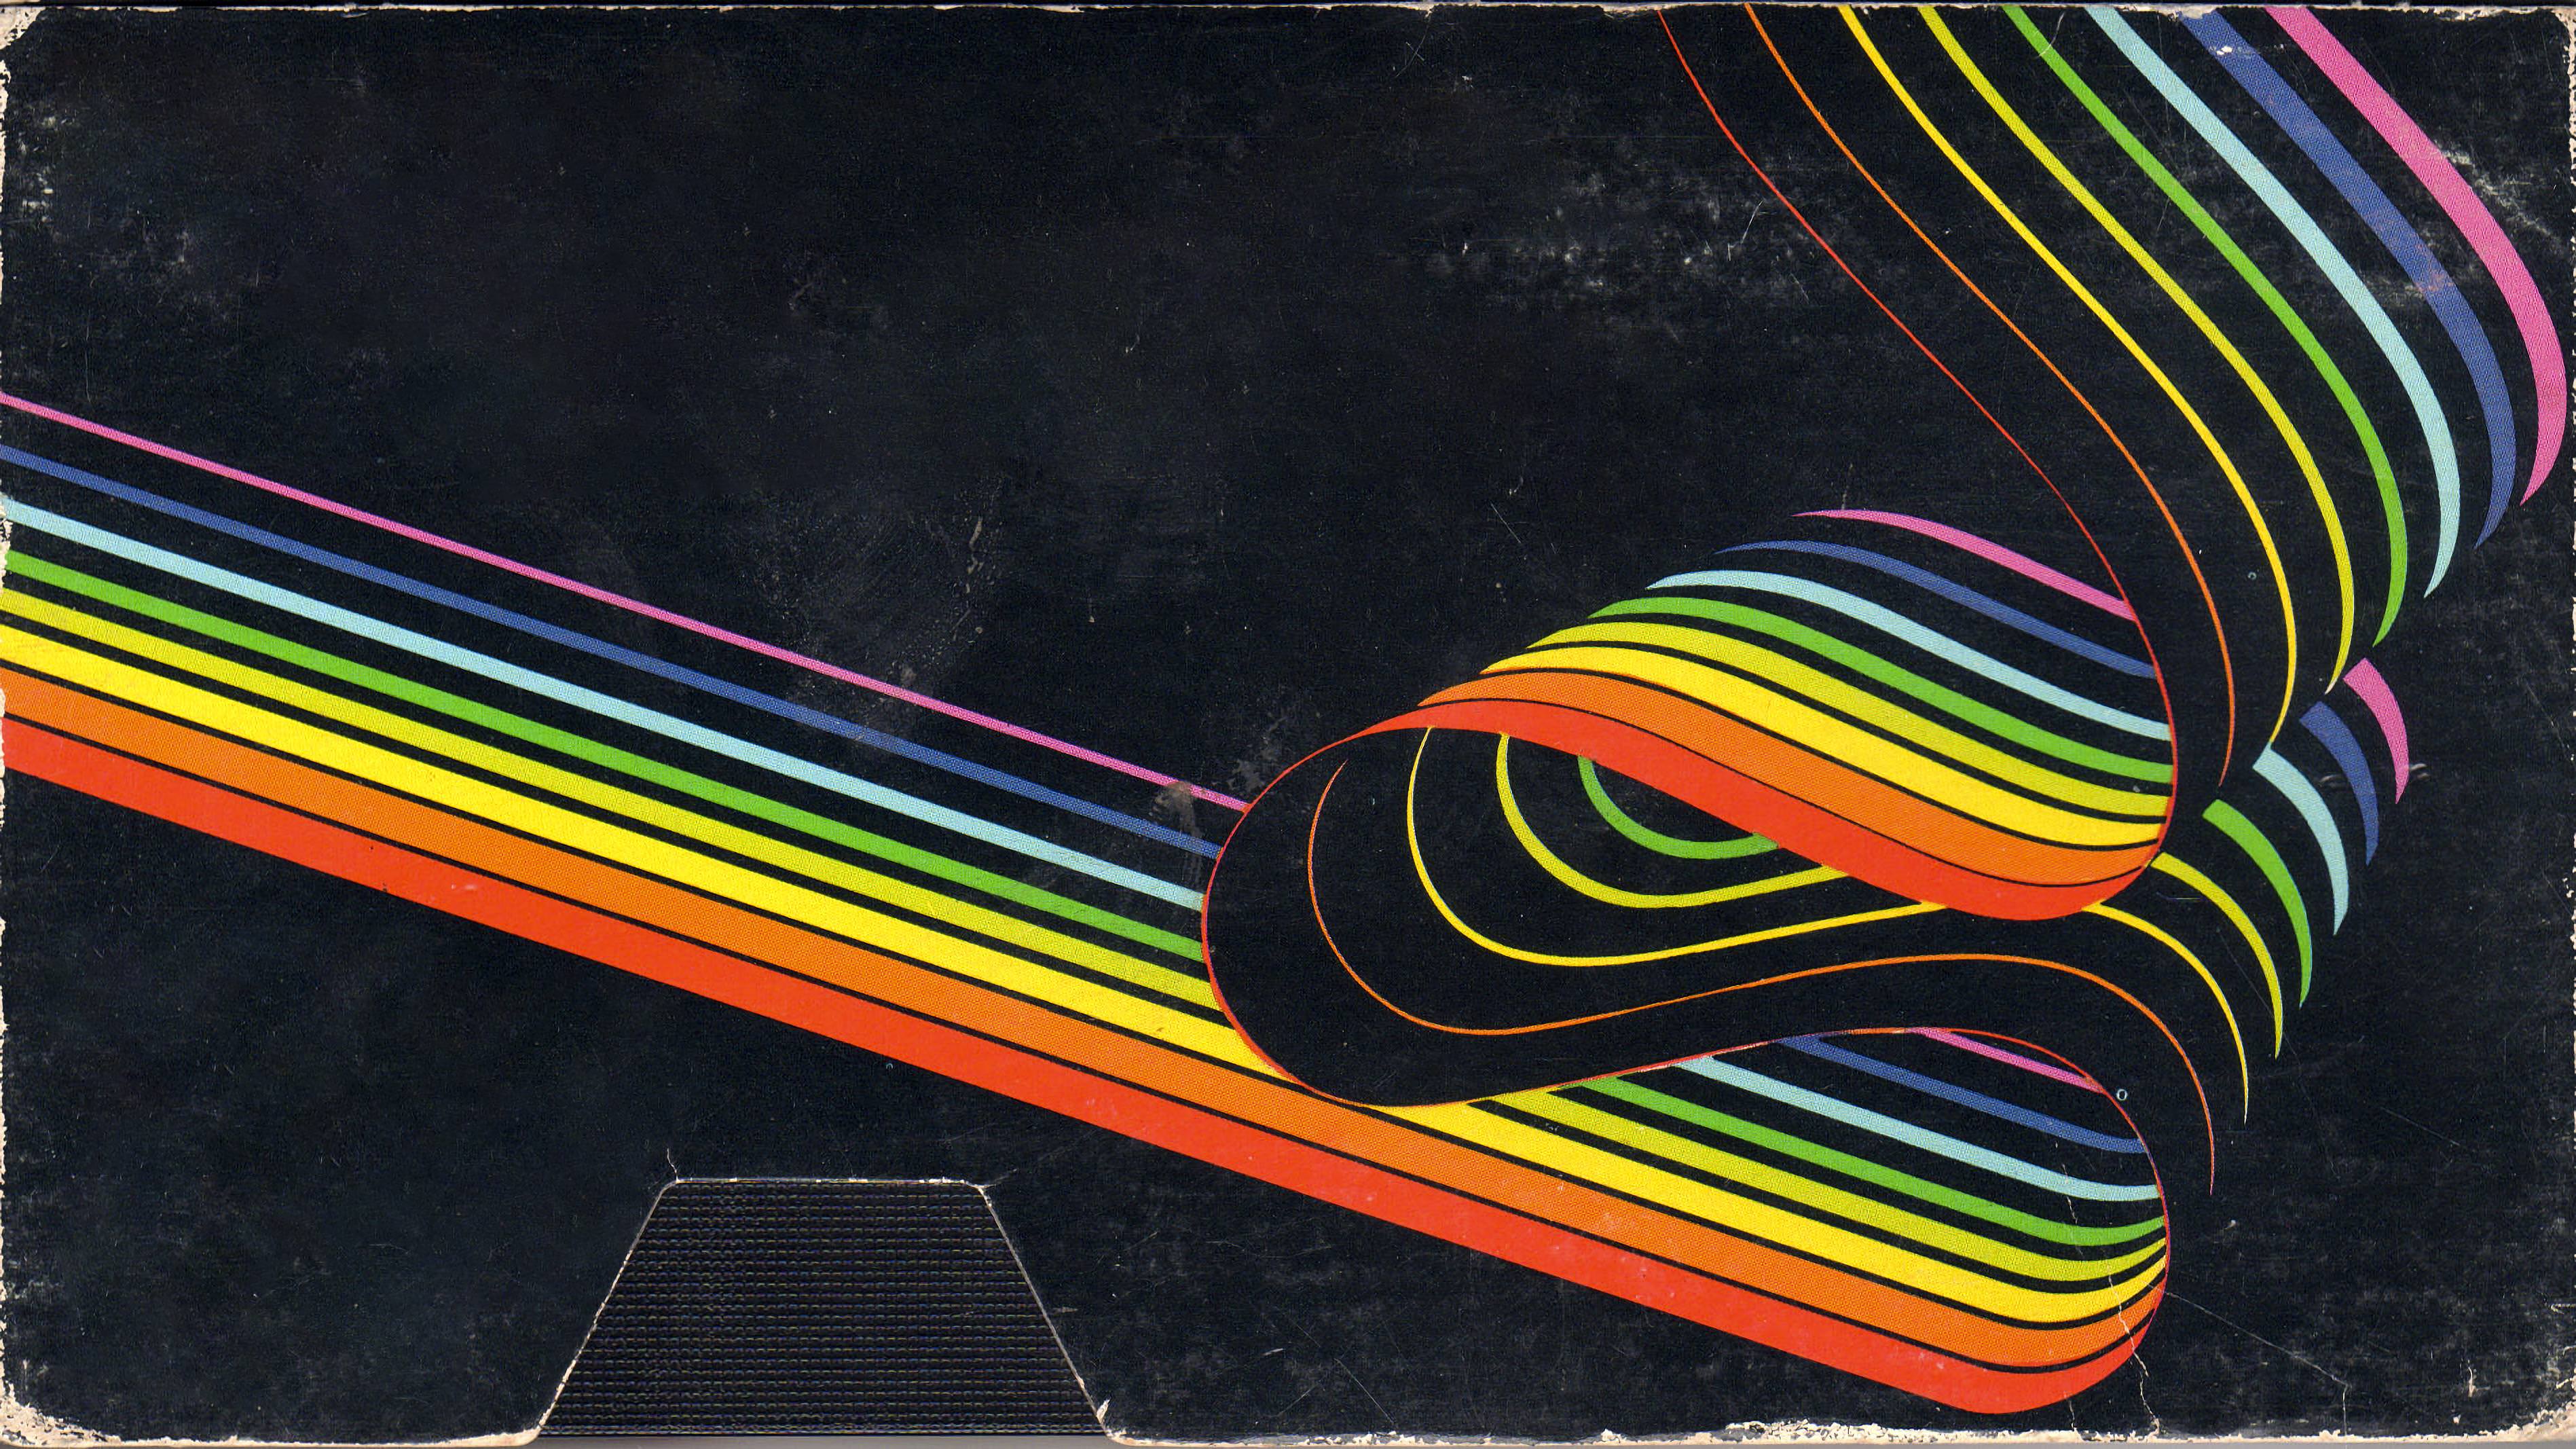 Rainbow Magnetics VHS Cover as seen from 'Orphans' turned into